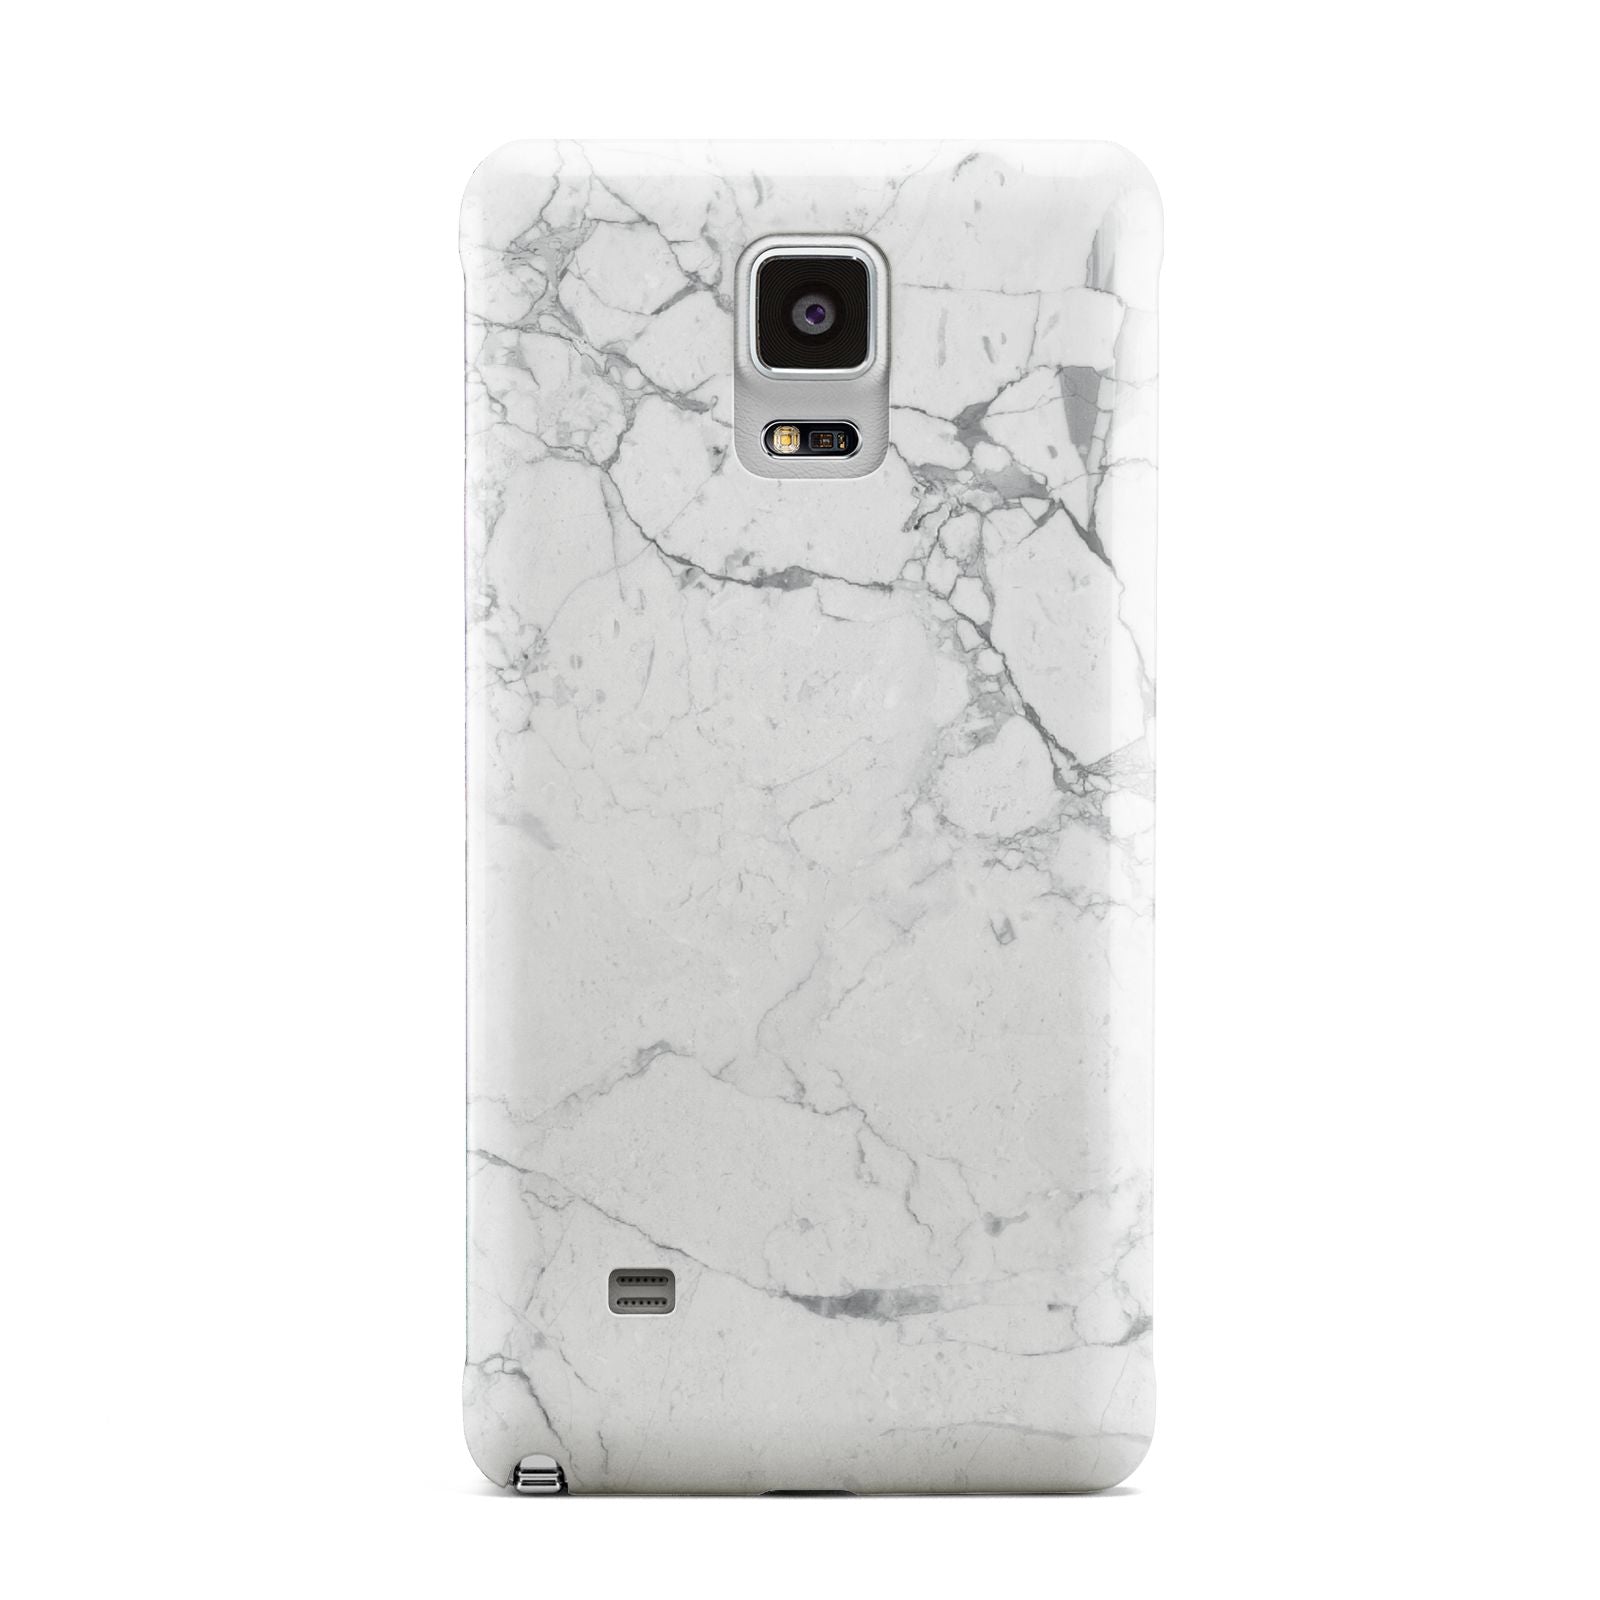 Faux Marble Effect Grey White Samsung Galaxy Note 4 Case